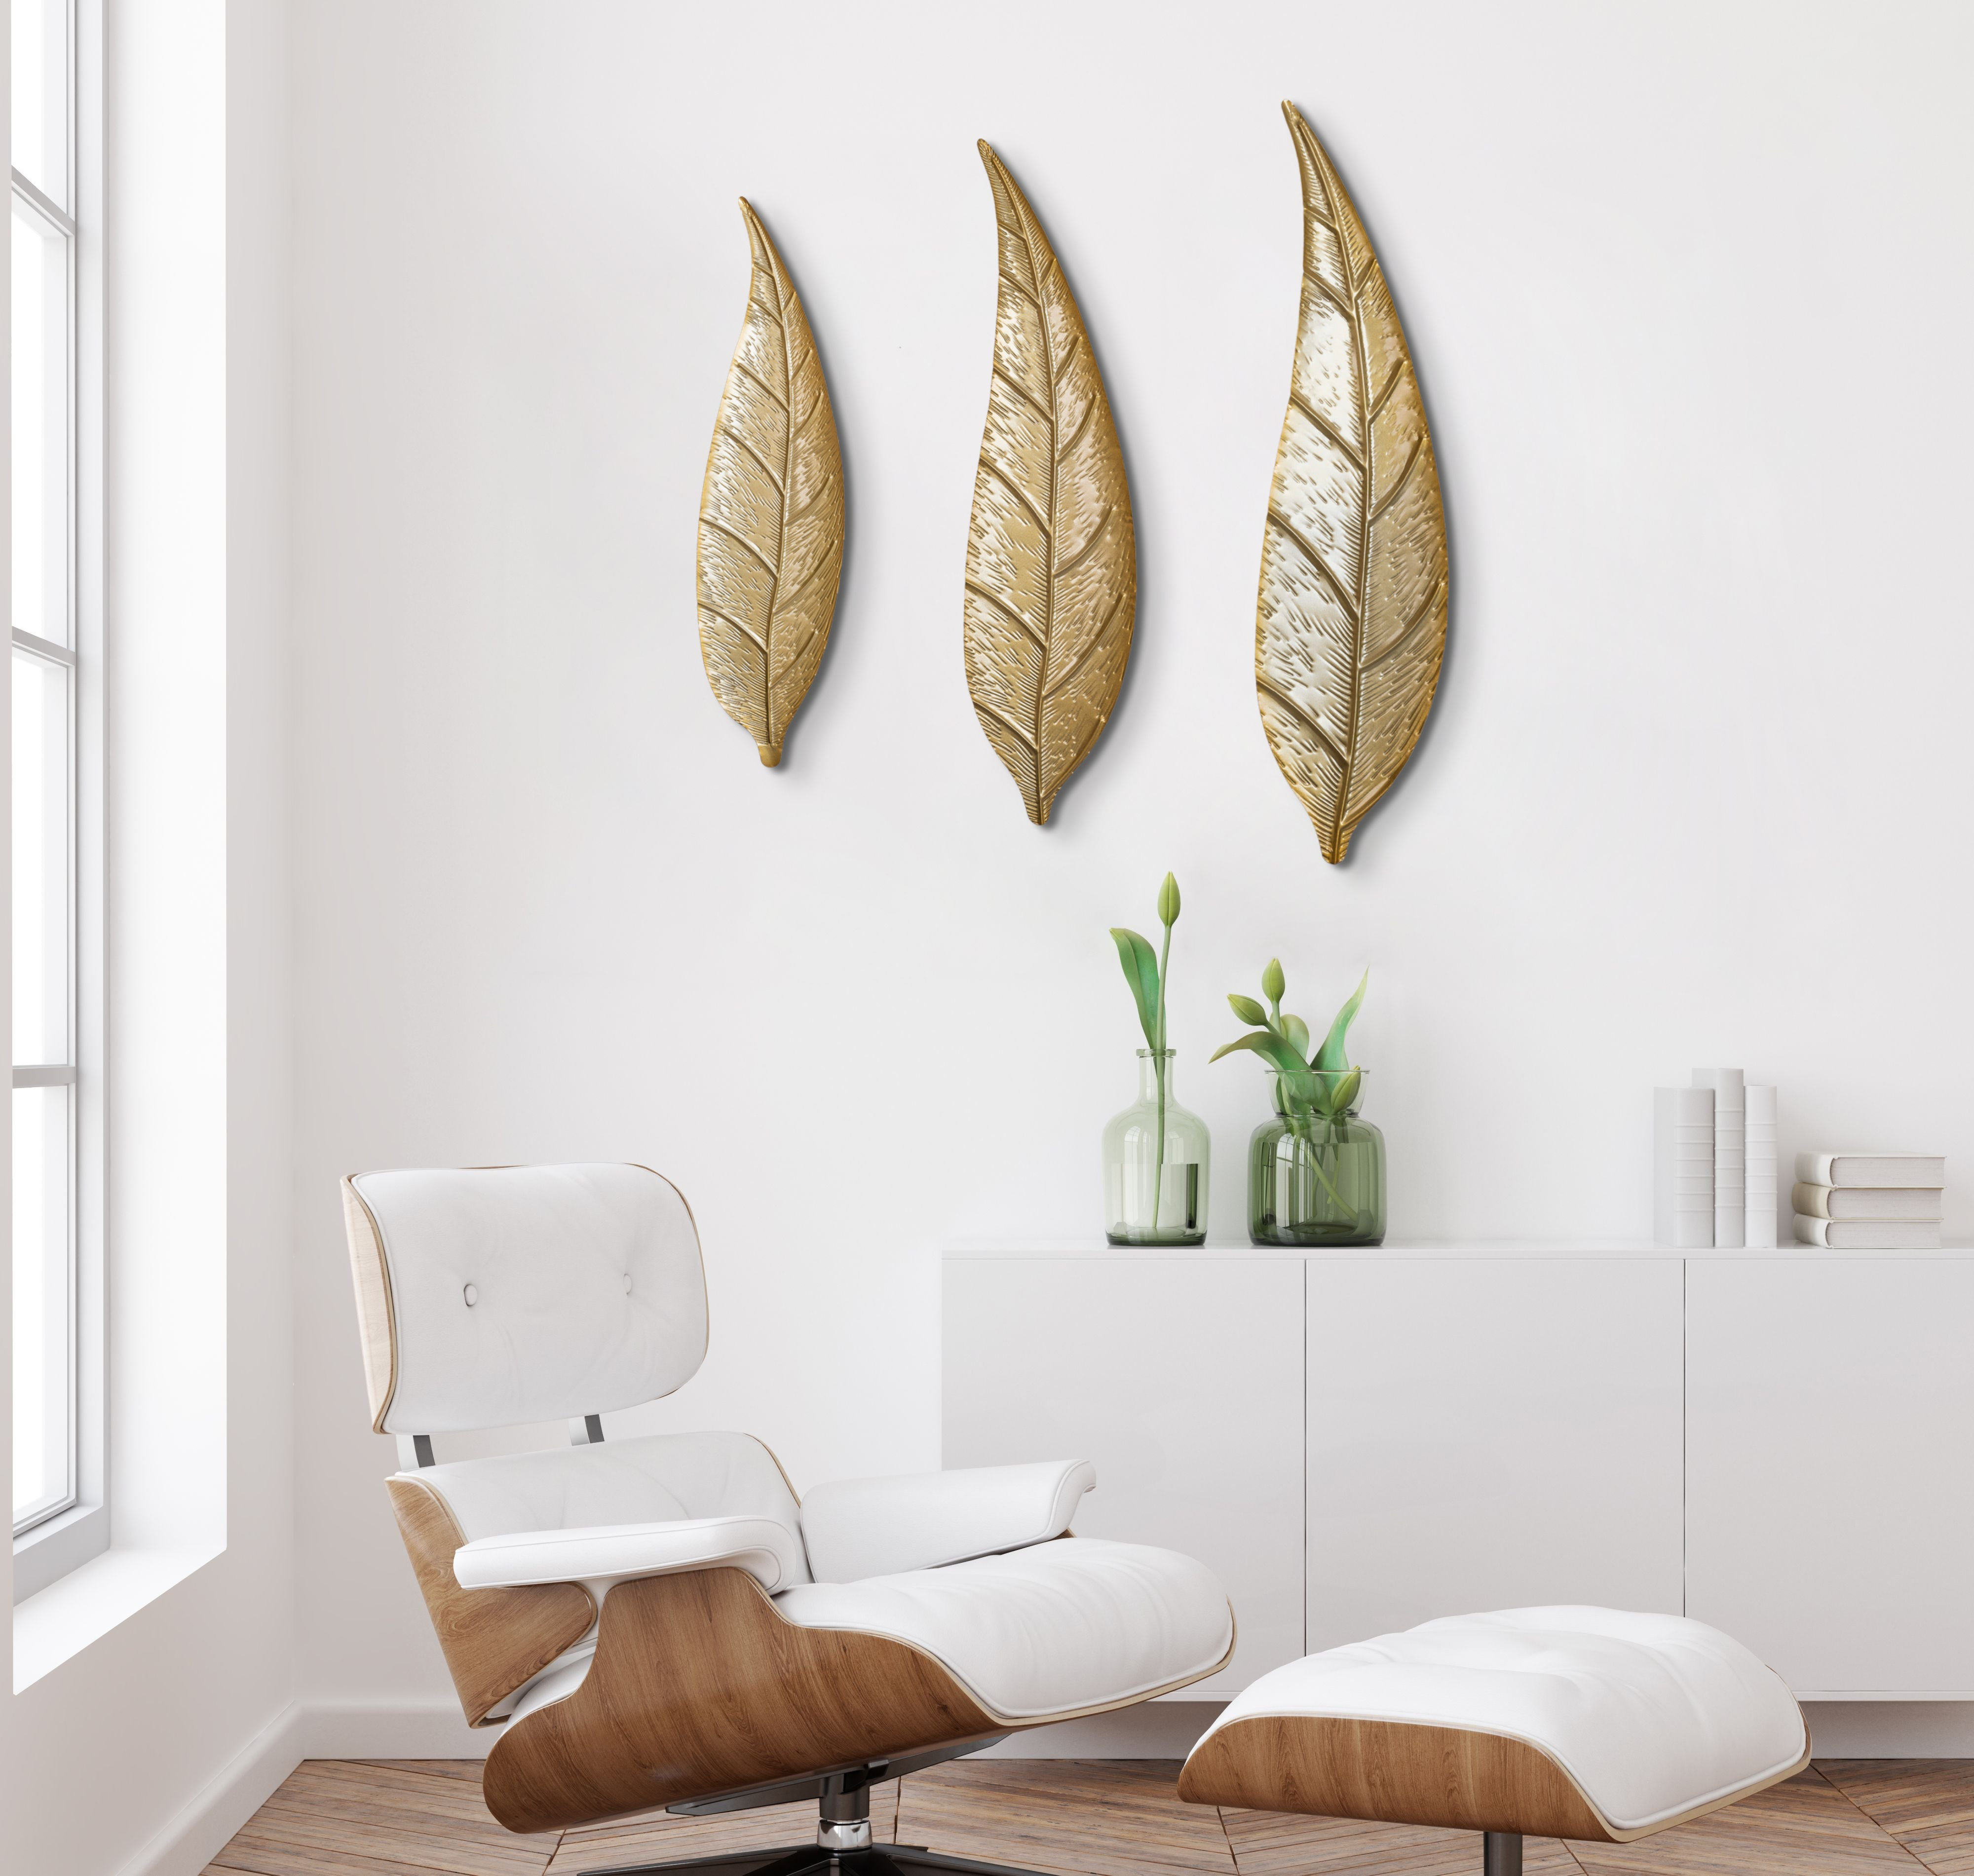 3 Piece Golden Leaves Metal Wall Decor, Large Wall Art, Wall Decor for  Living Room, Bedroom, Office, Easy to Install